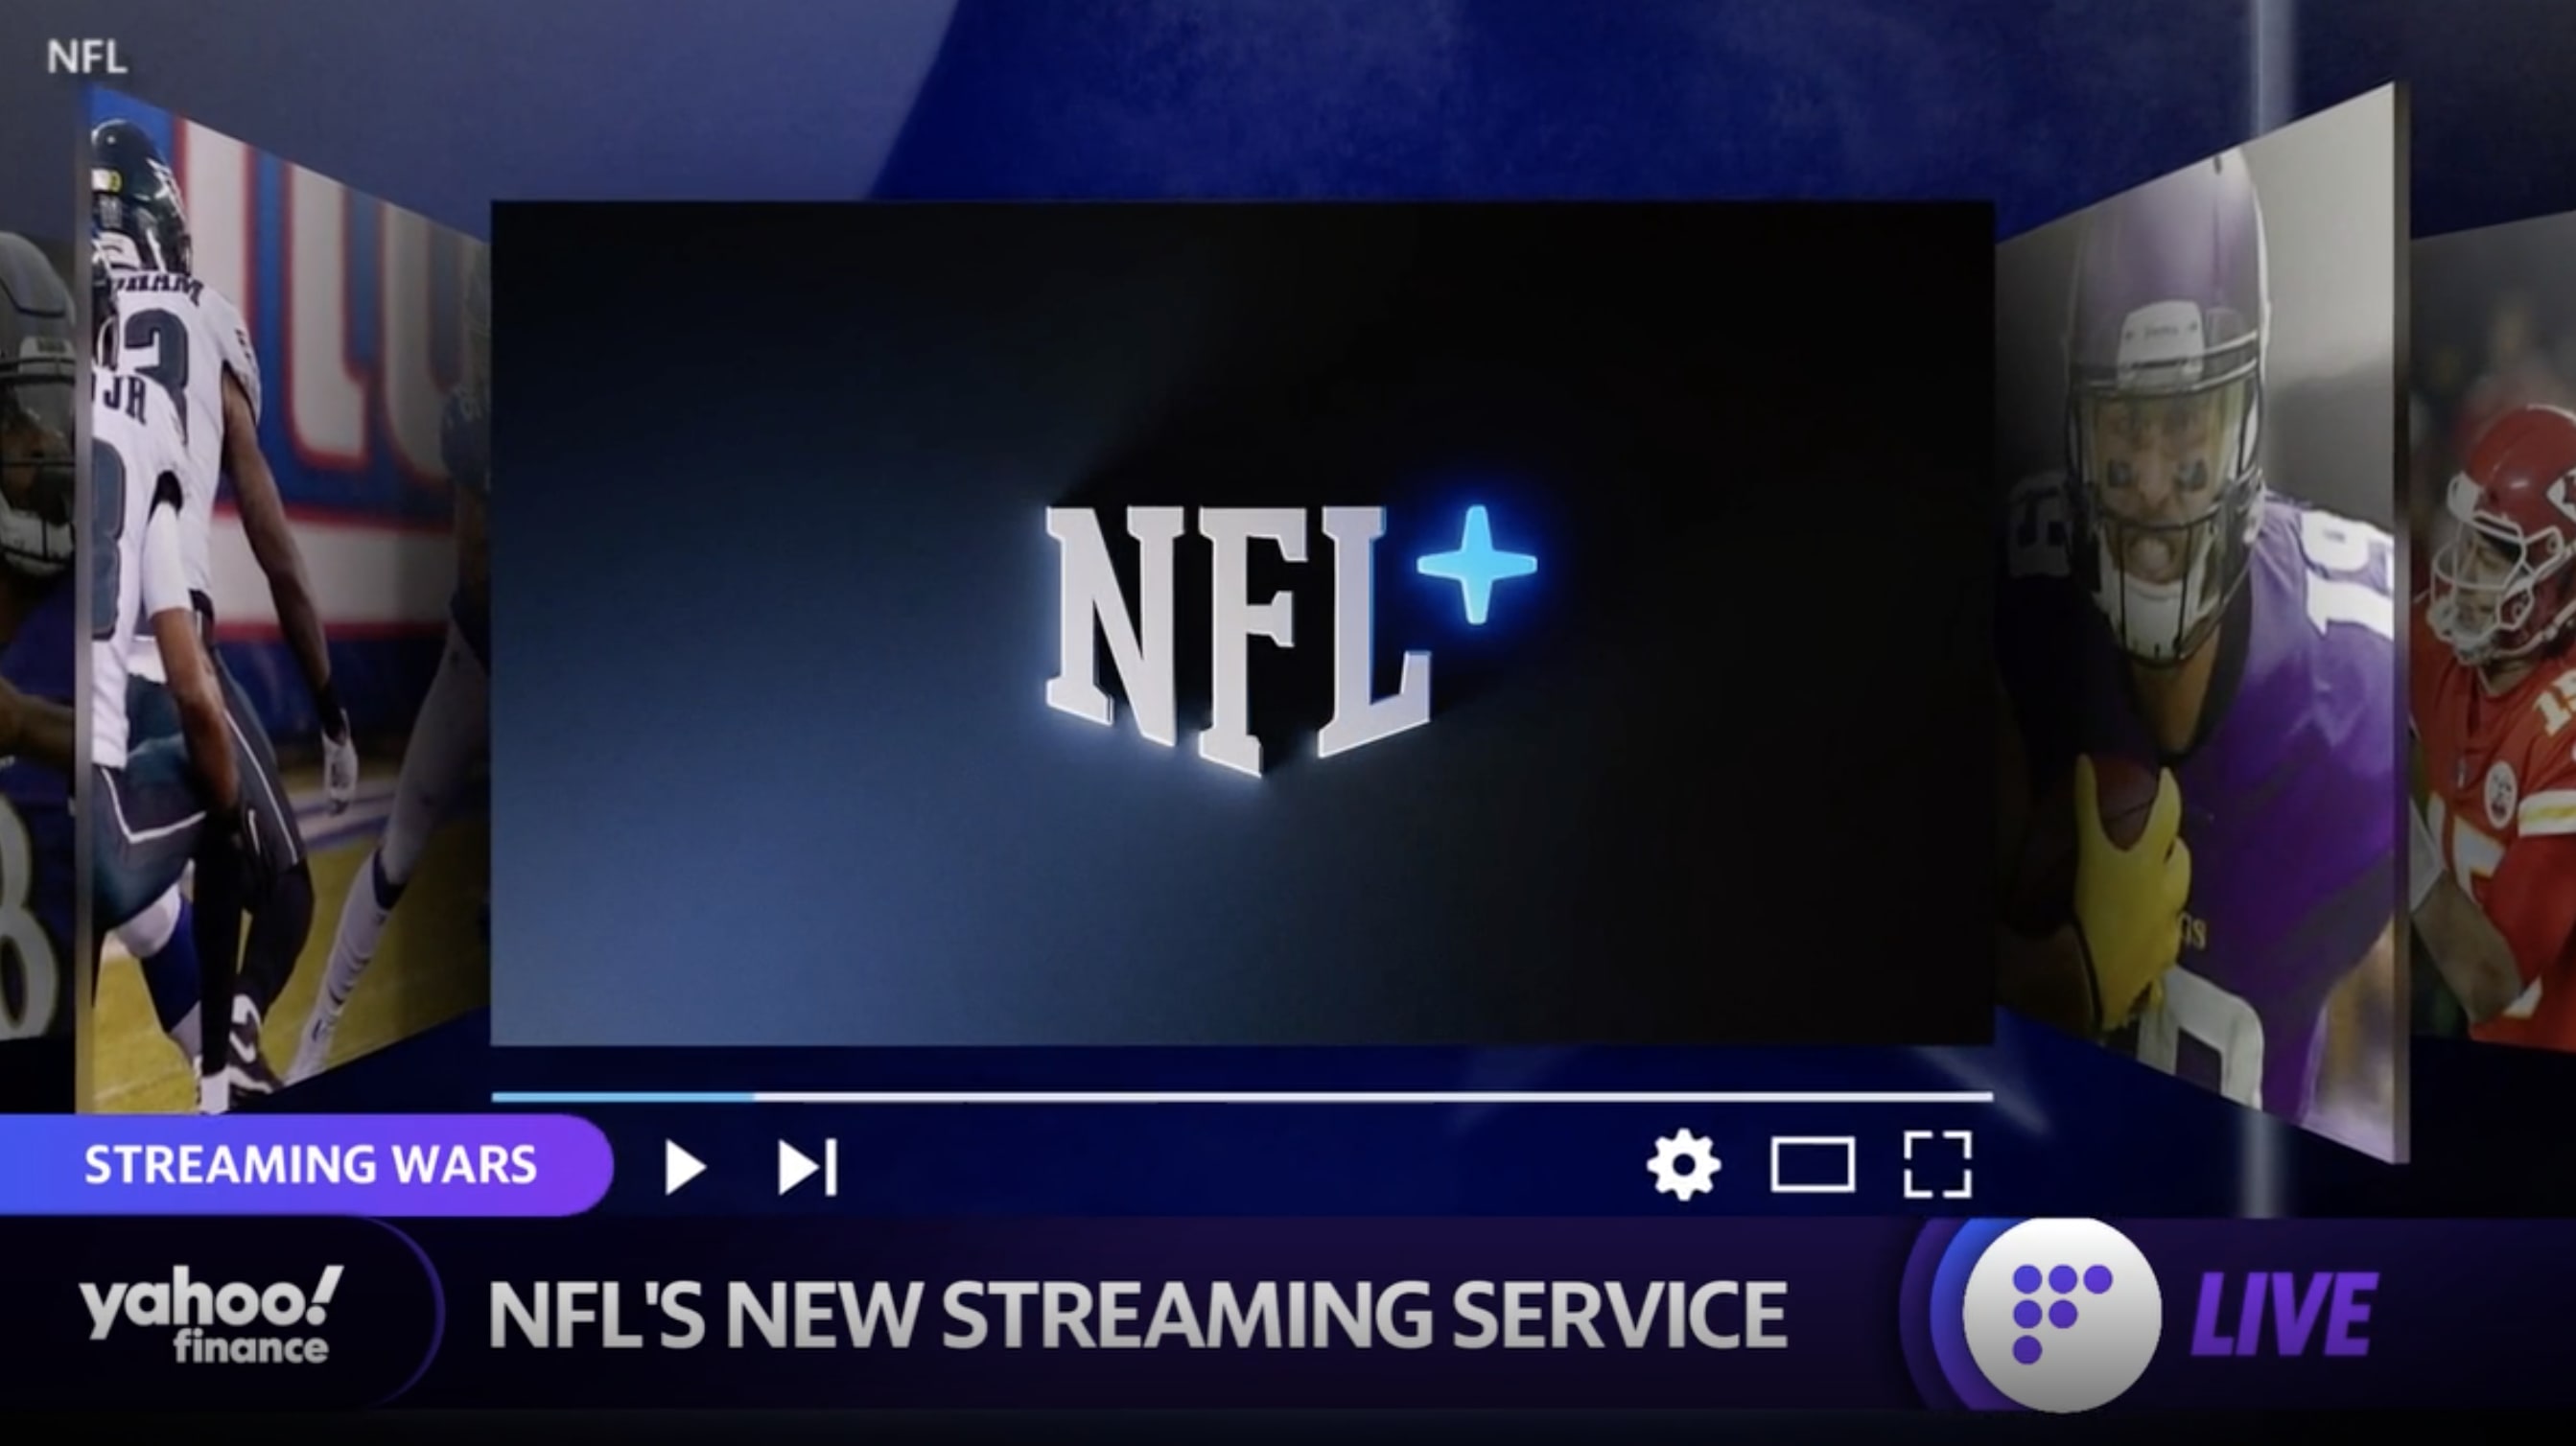 The NFL's new streaming service with live games, explained